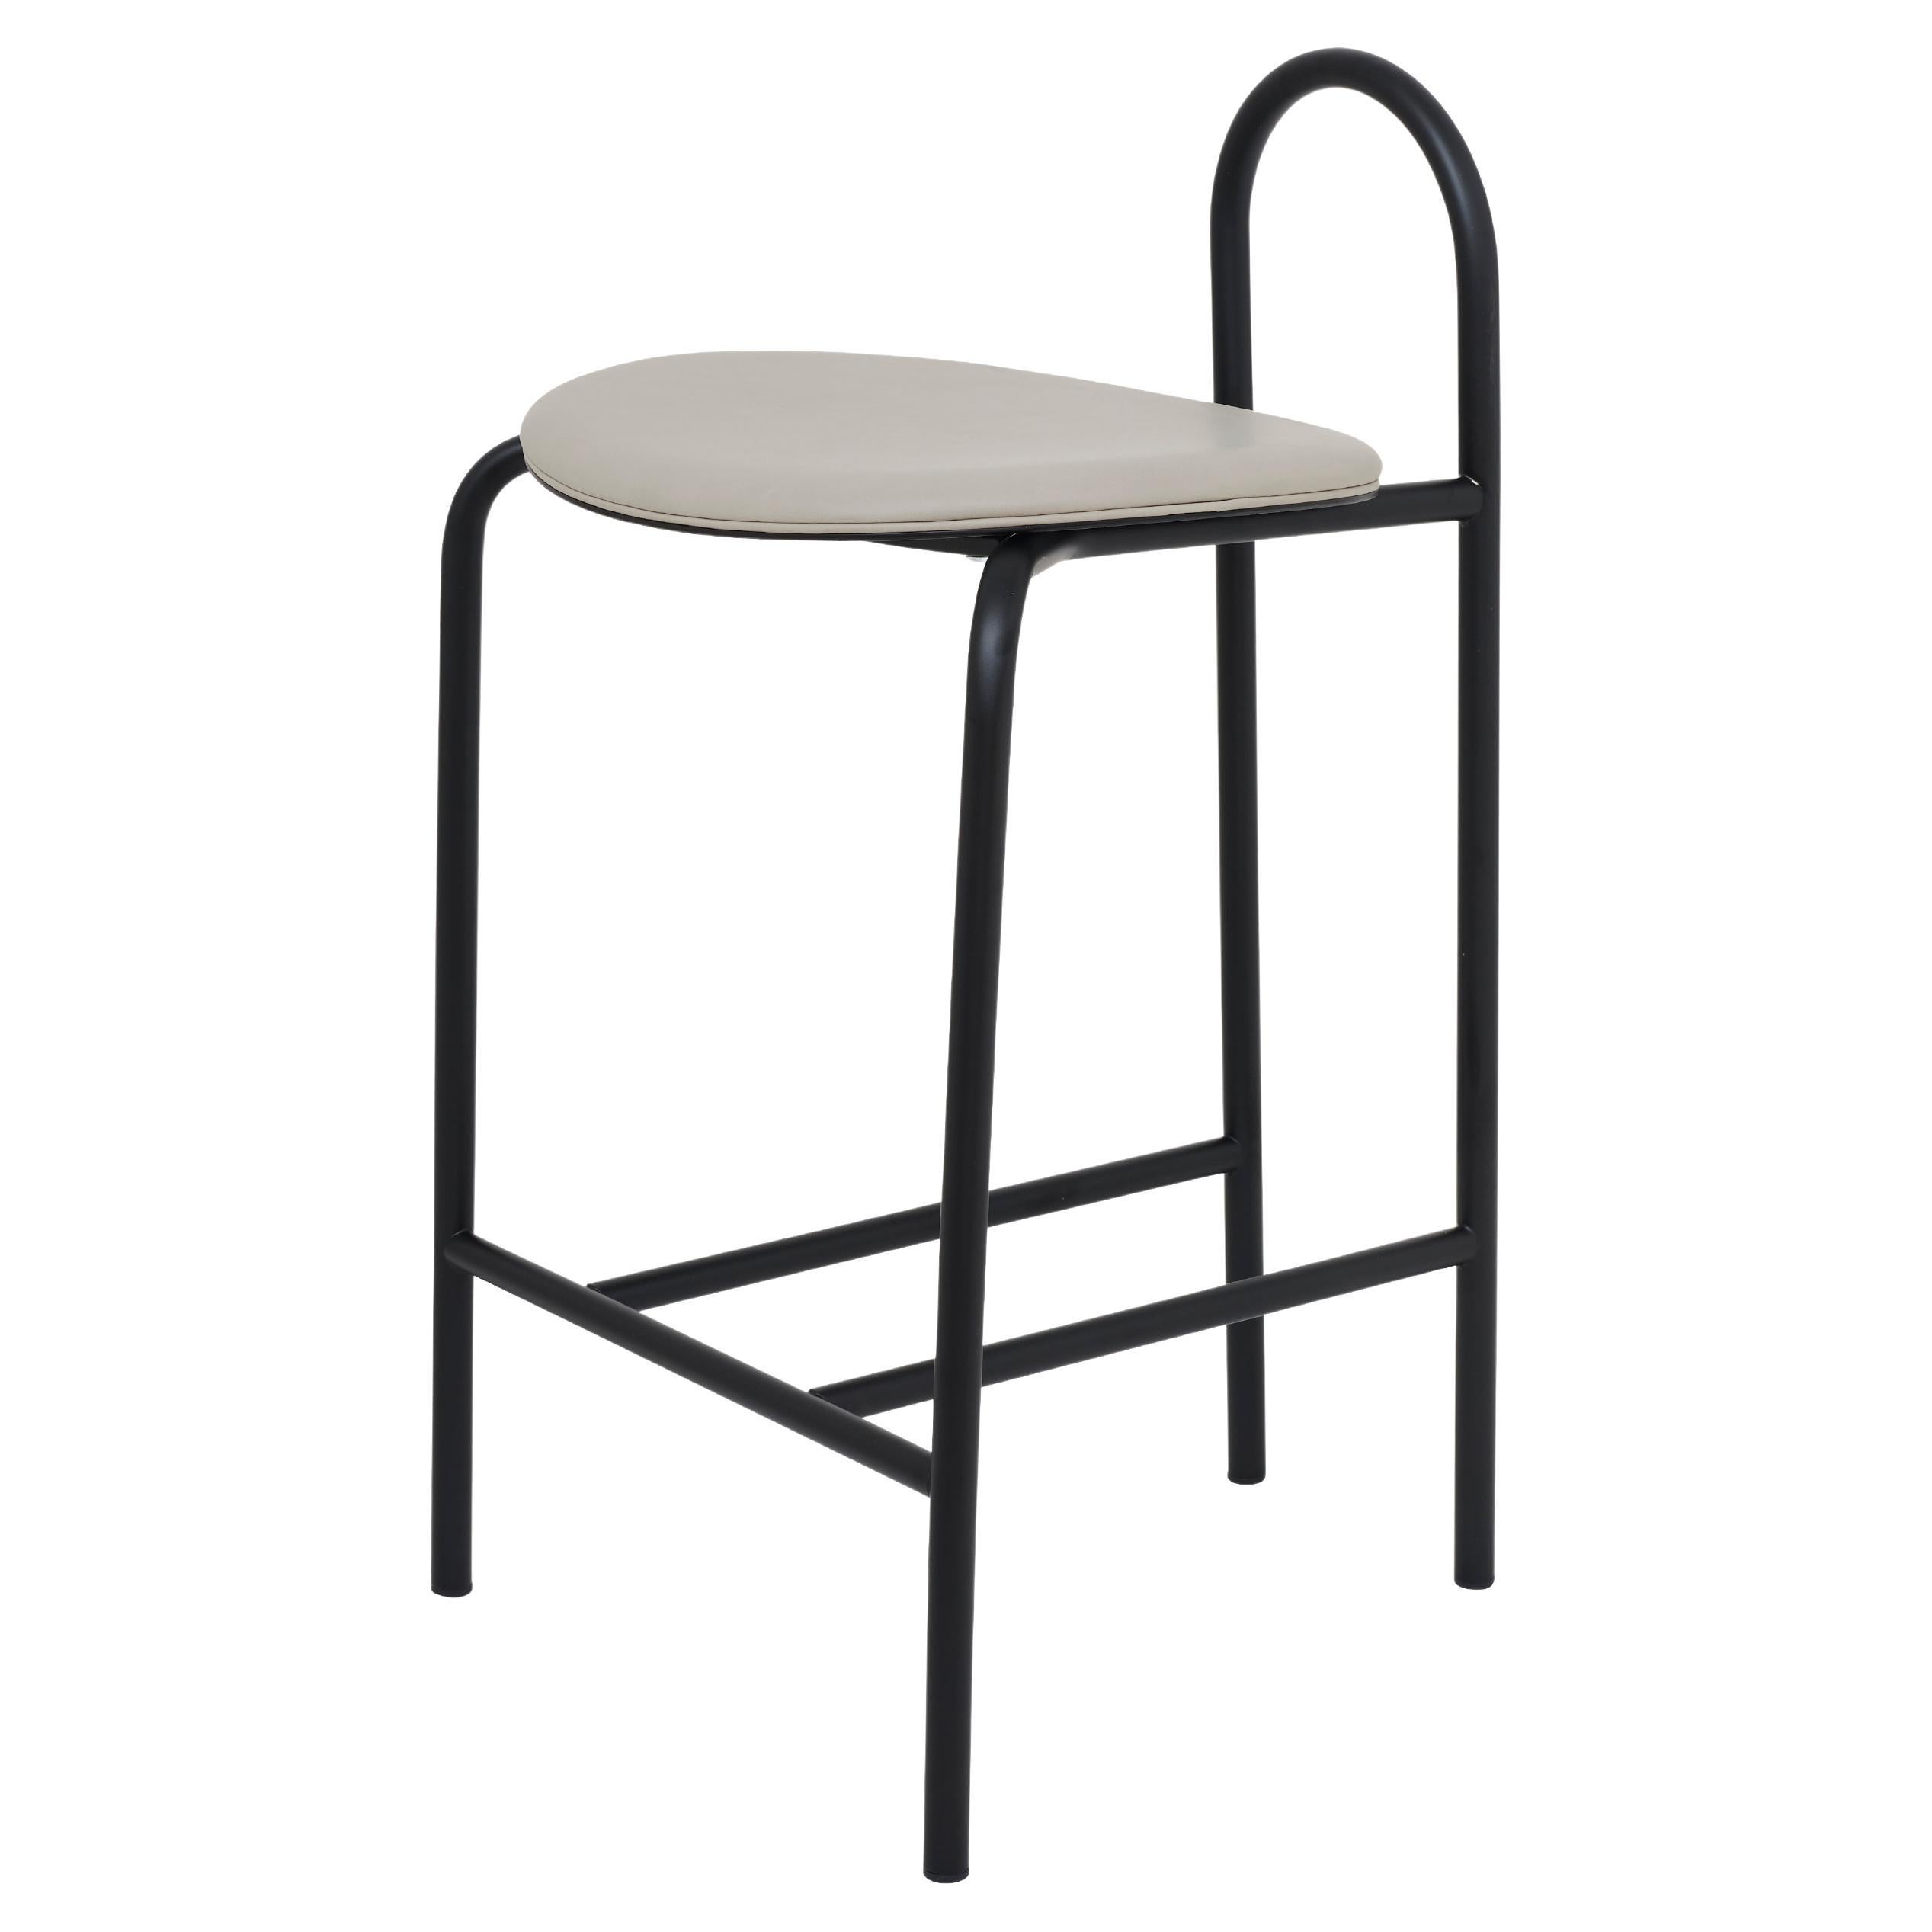 SP01 Michelle Low Bar Stool in Edinburgh Mist Leather, Made in Italy For Sale